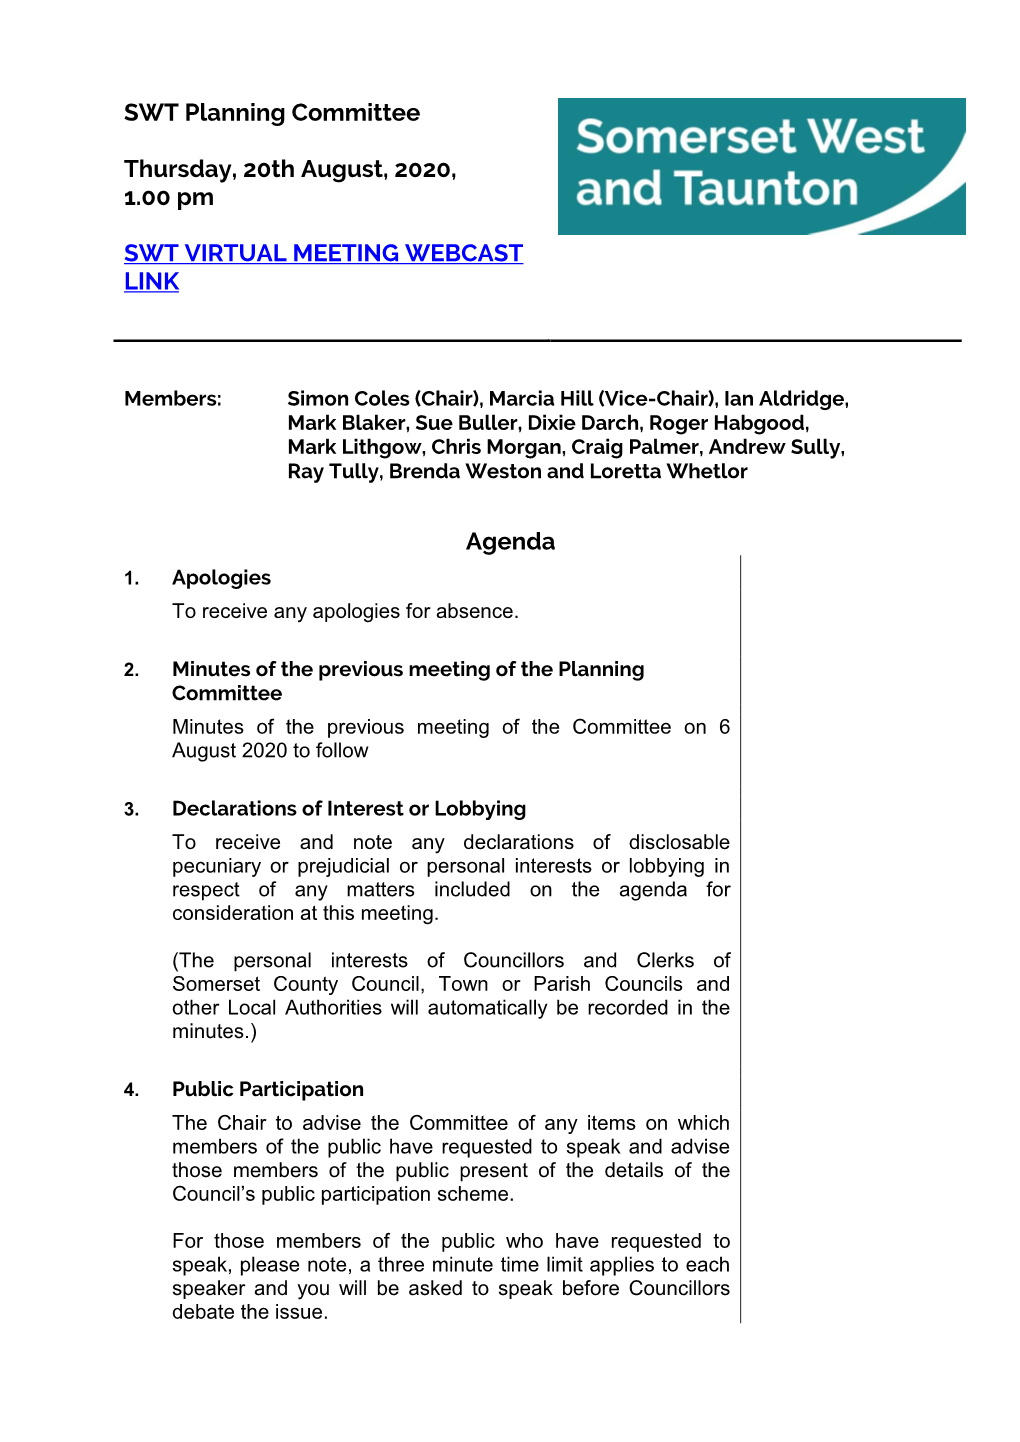 (Public Pack)Agenda Document for SWT Planning Committee, 20/08